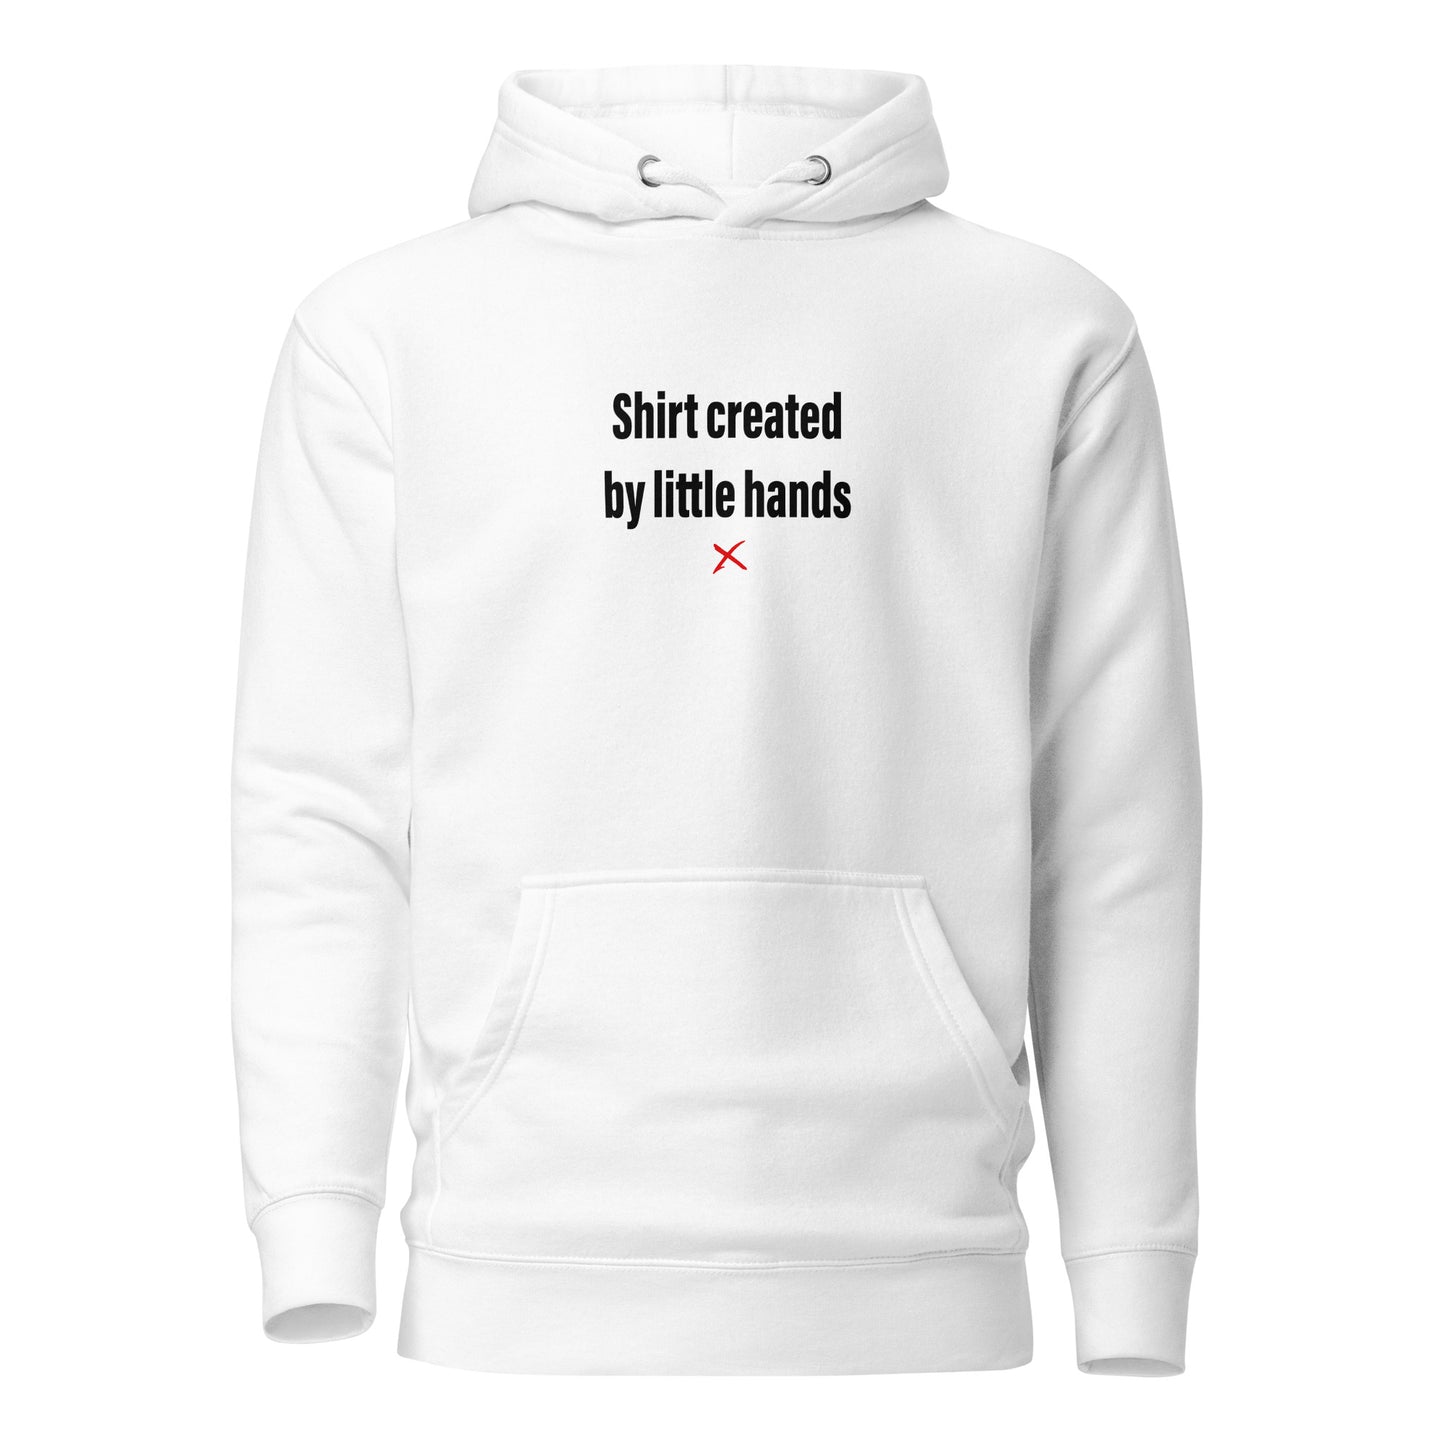 Shirt created by little hands - Hoodie